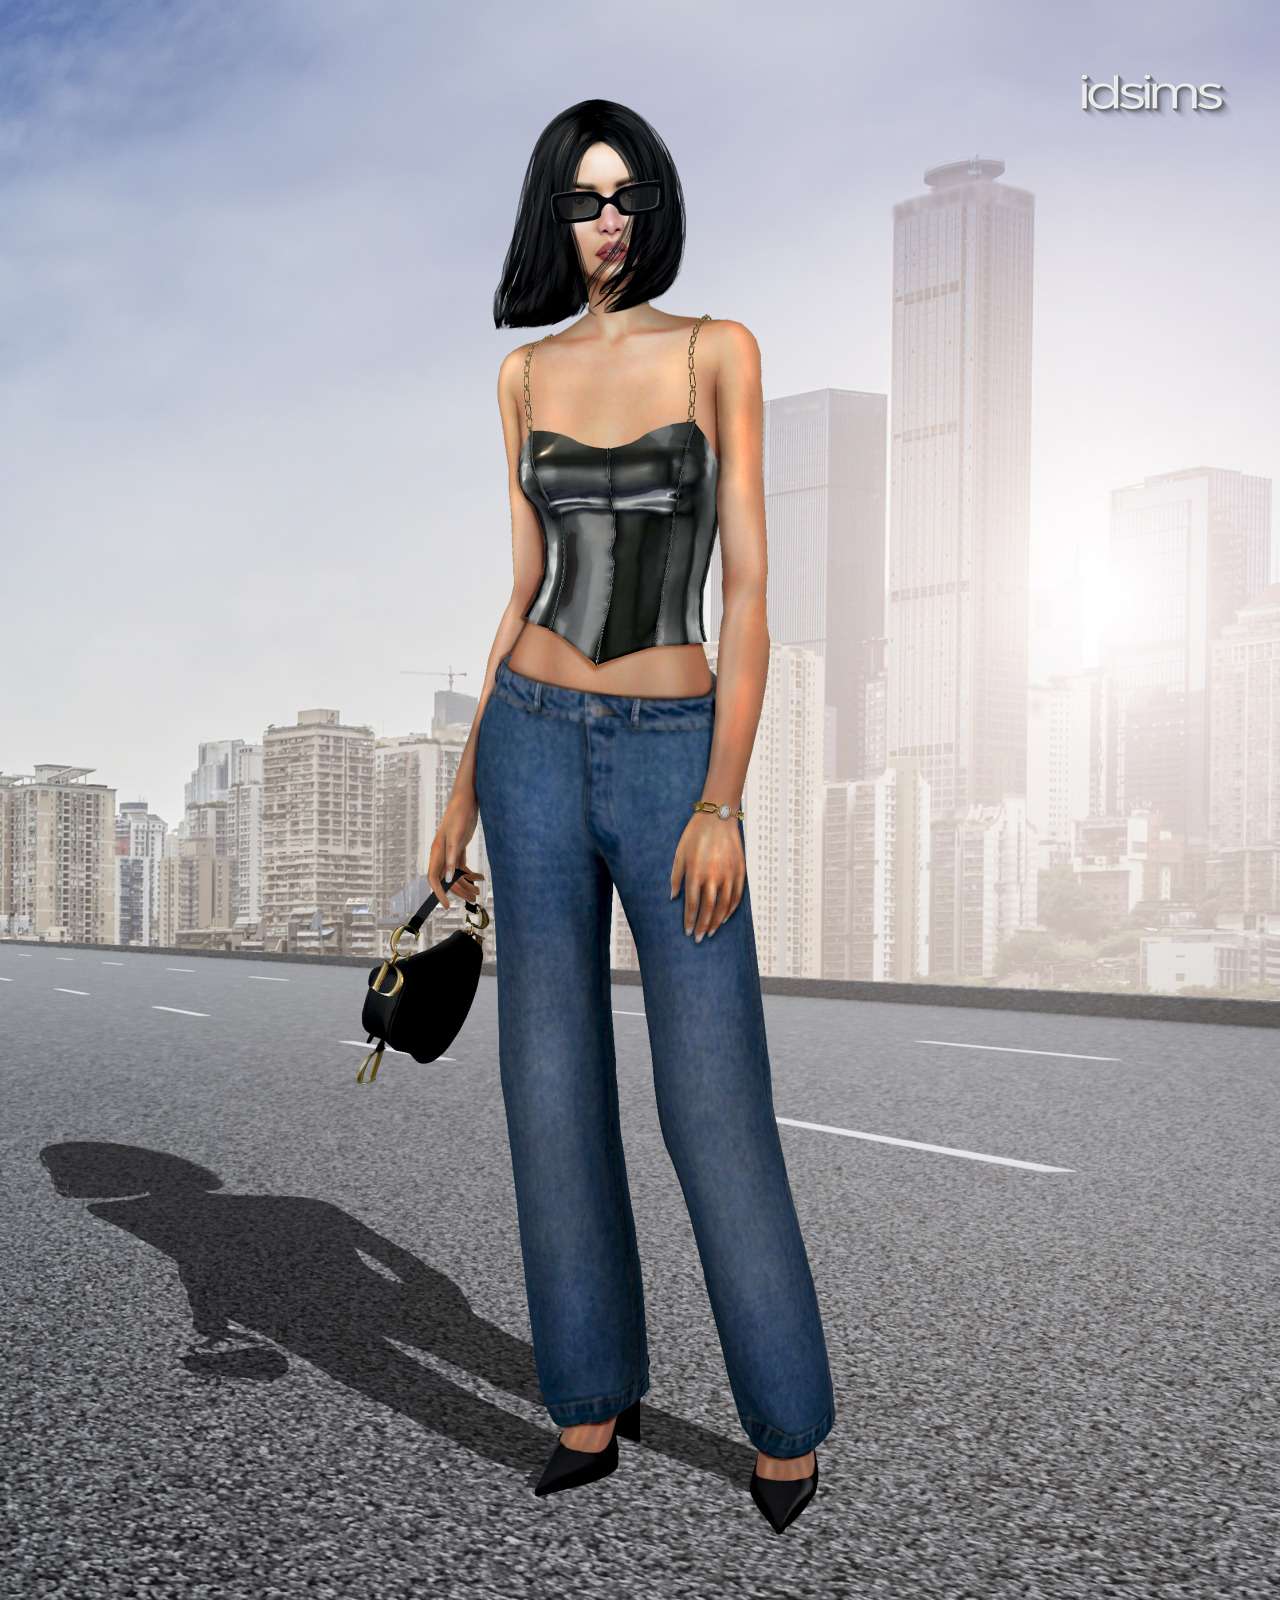 Idsims December Fashion Collection